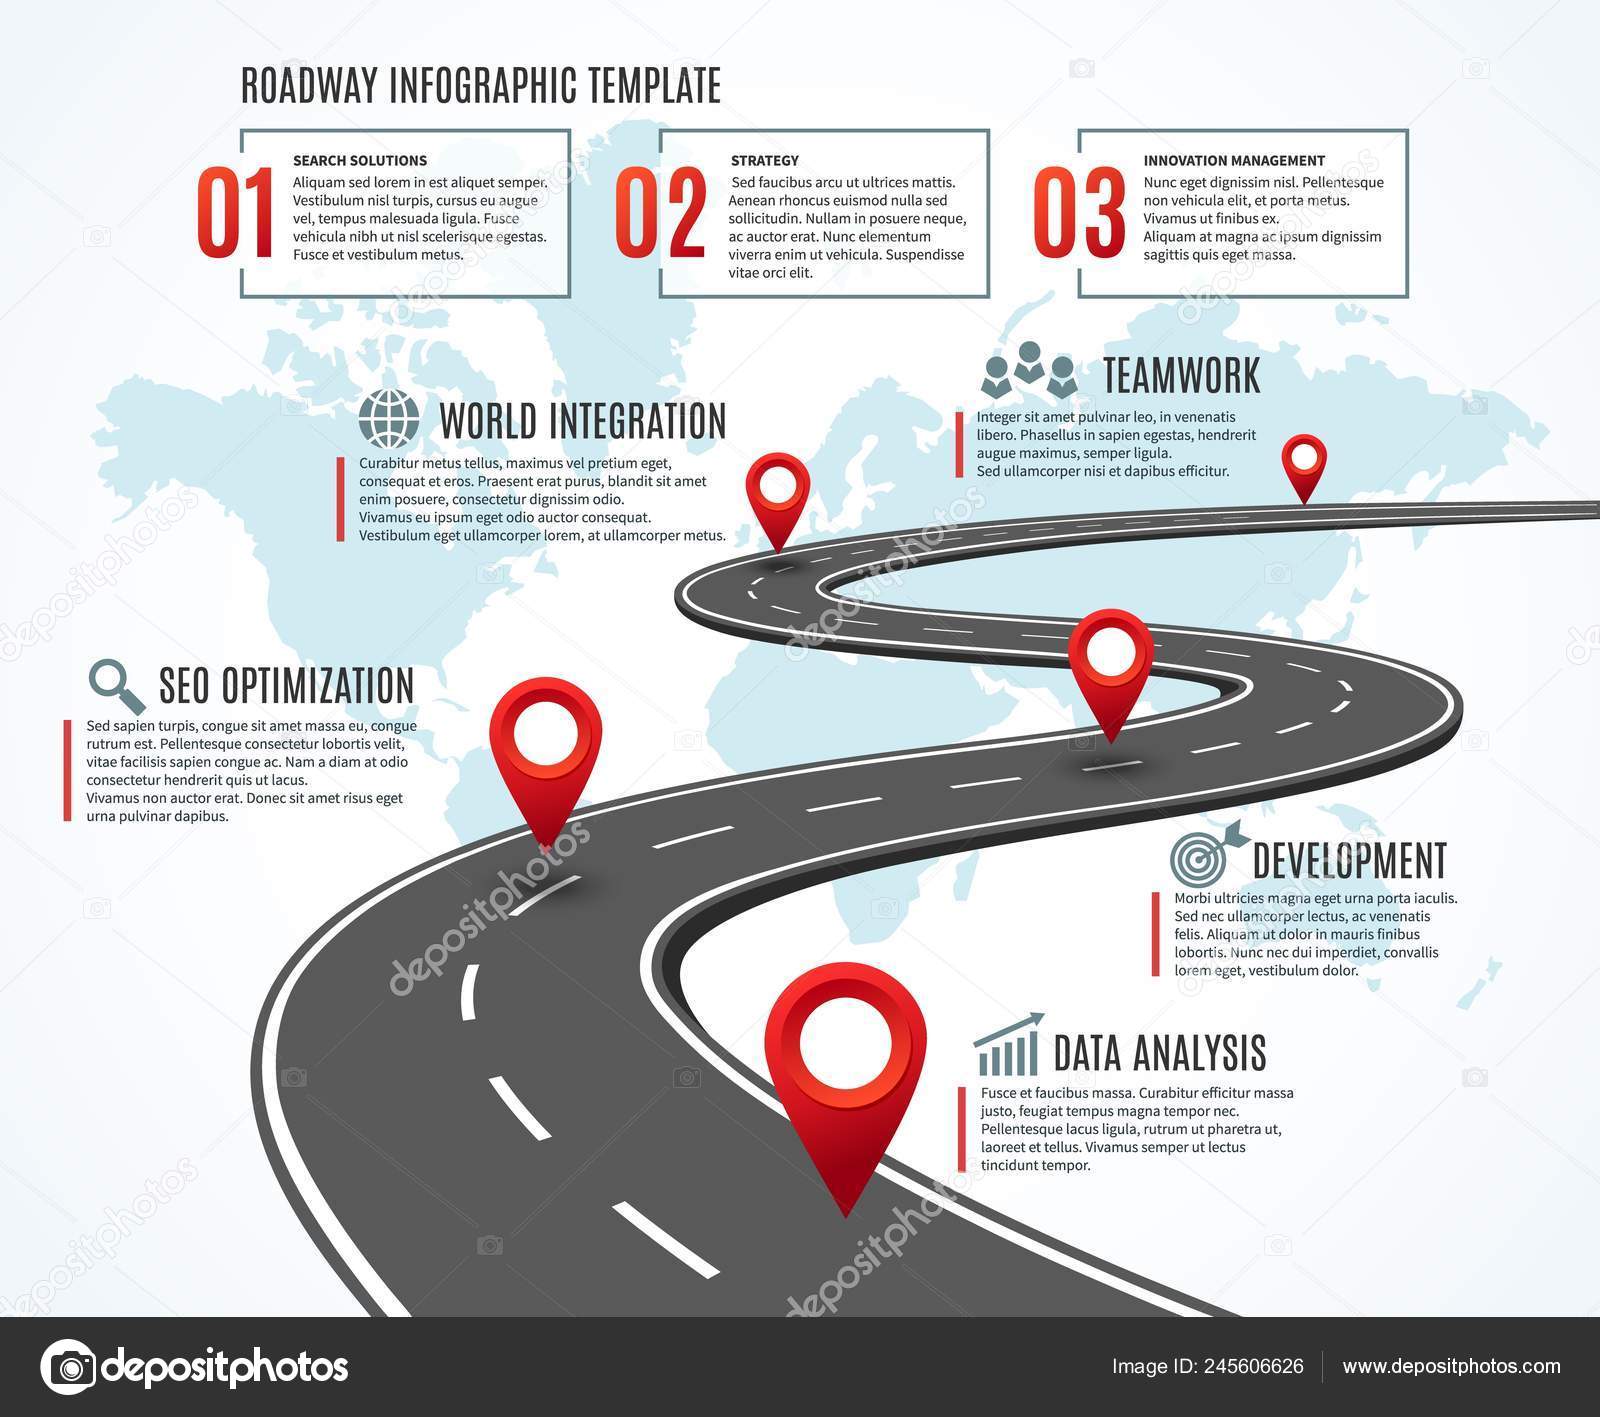 Presentation Business road map infographic template 547850 - Download Free Vectors, Clipart ...